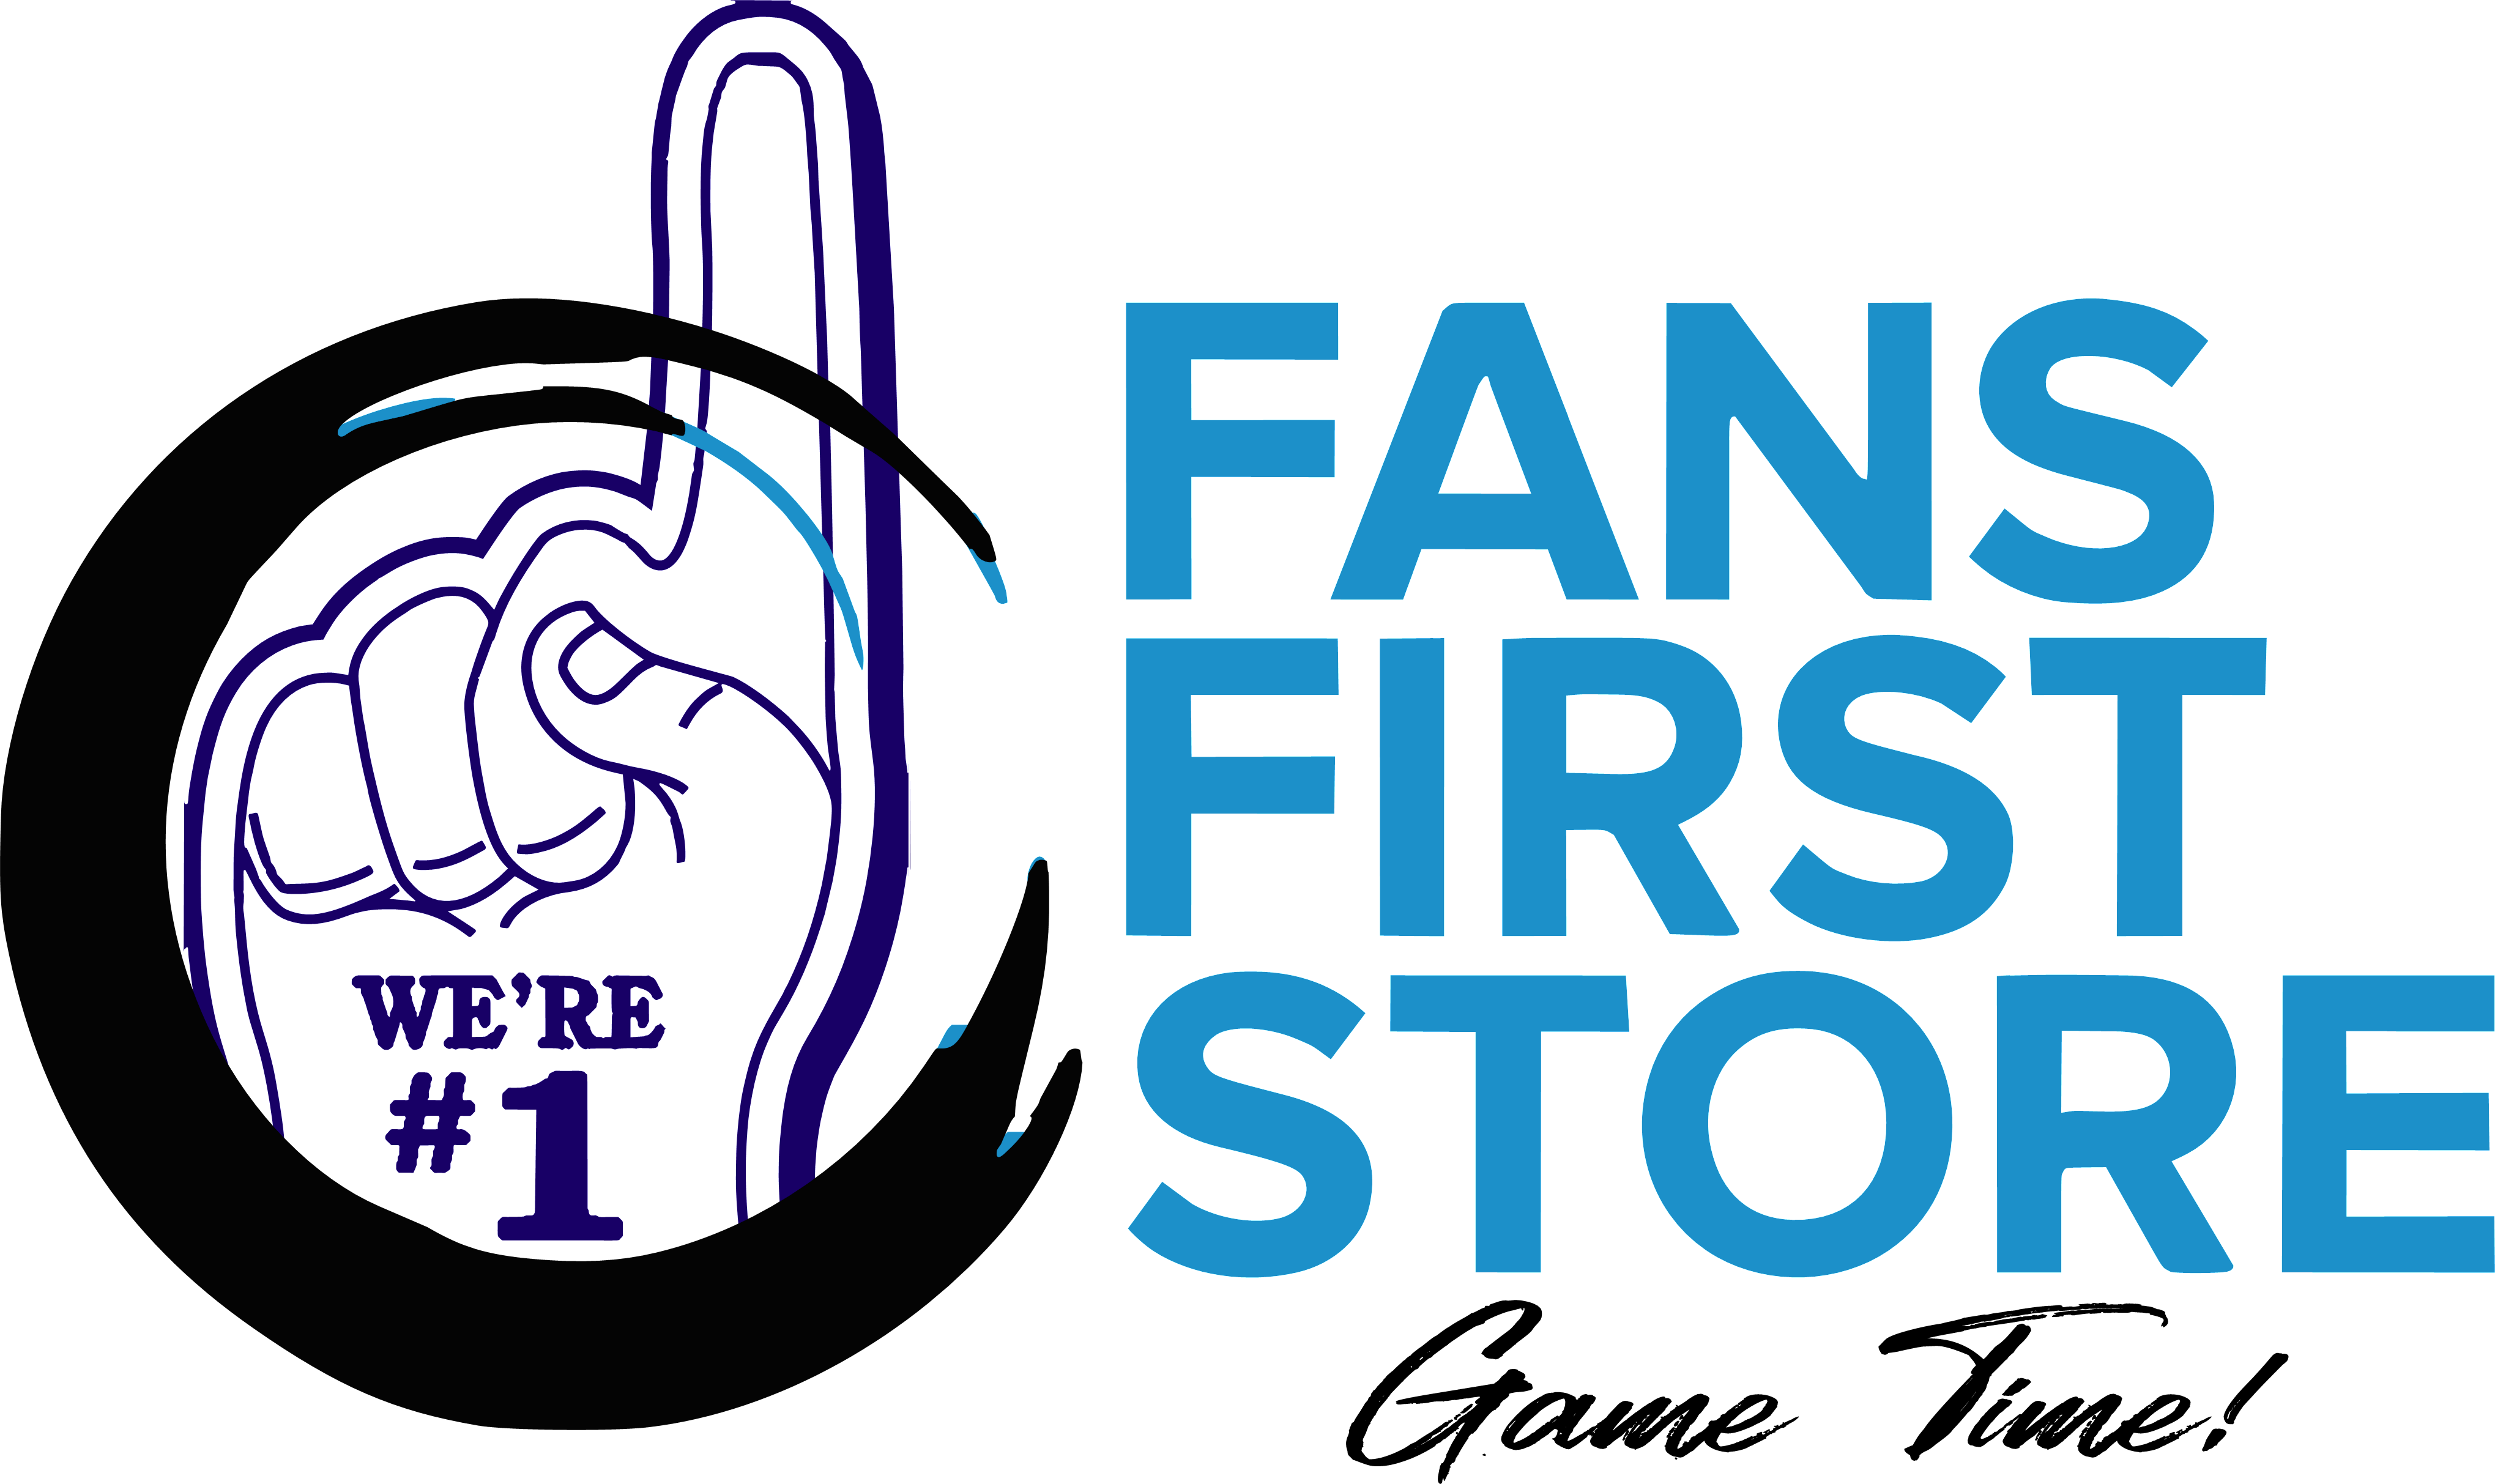 Fans First Store